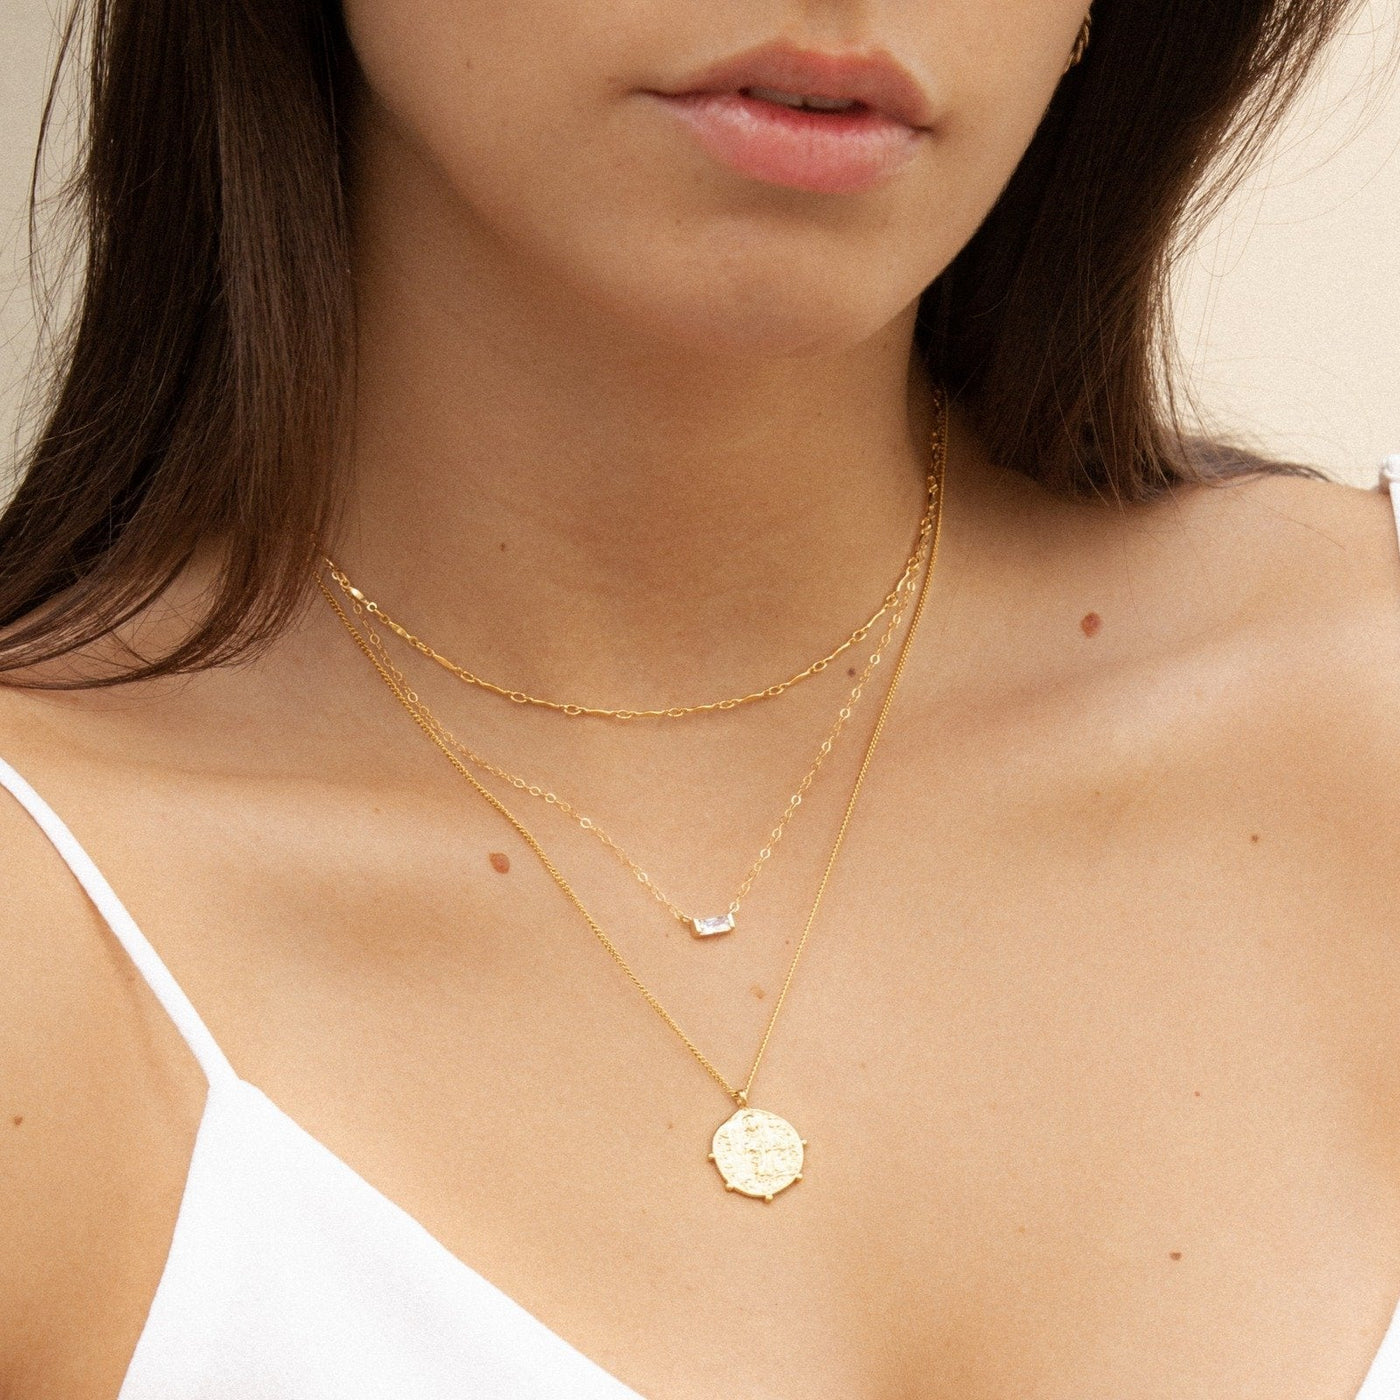 Dapped Chain Necklace by Simple & Dainty Jewelry